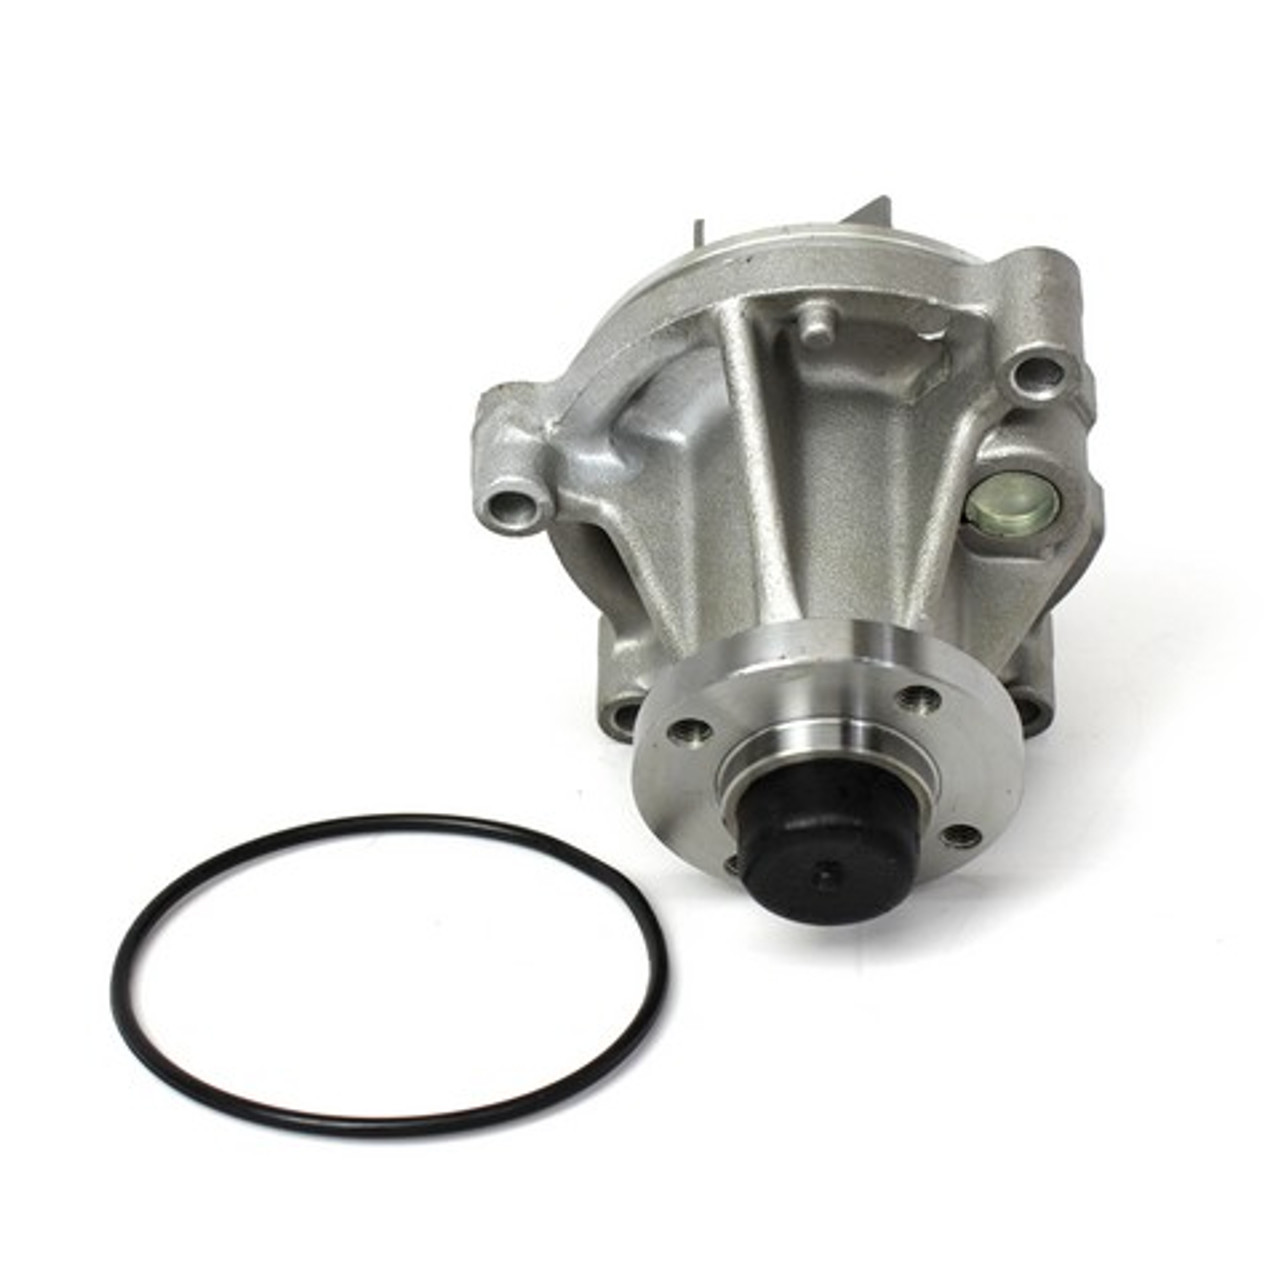 Water Pump 5.4L 2013 Ford E-250 - WP4170.52